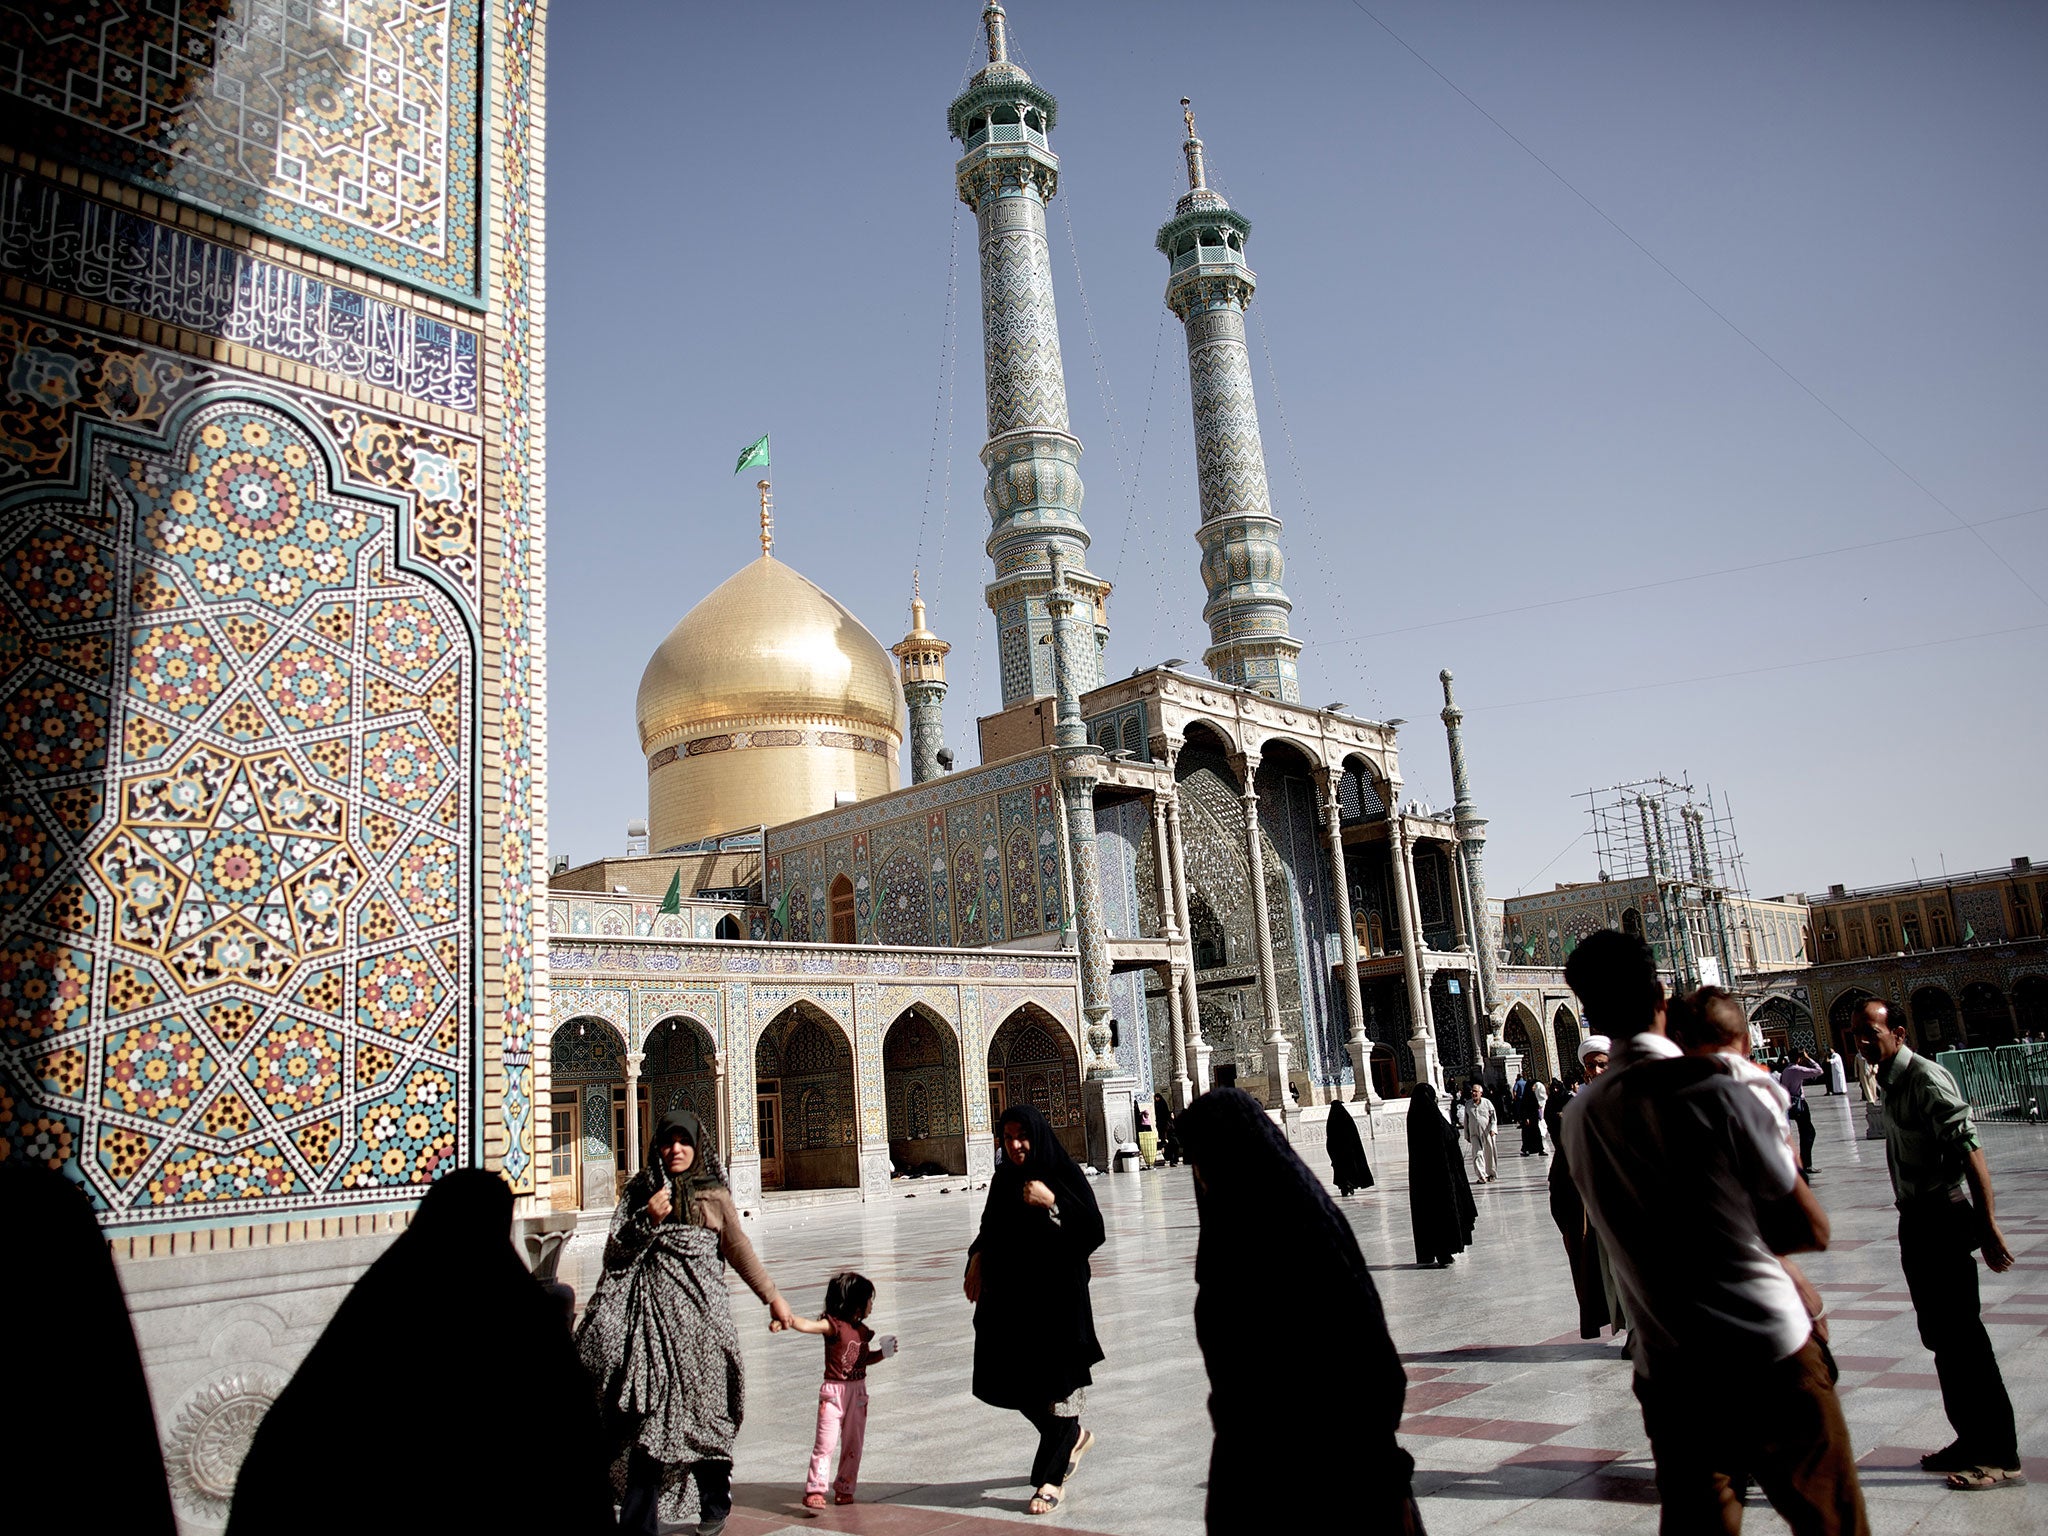 Closer integration with Central Asia and China would boost Iran’s tourist industry, which is already booming in shrine cities such as Qom